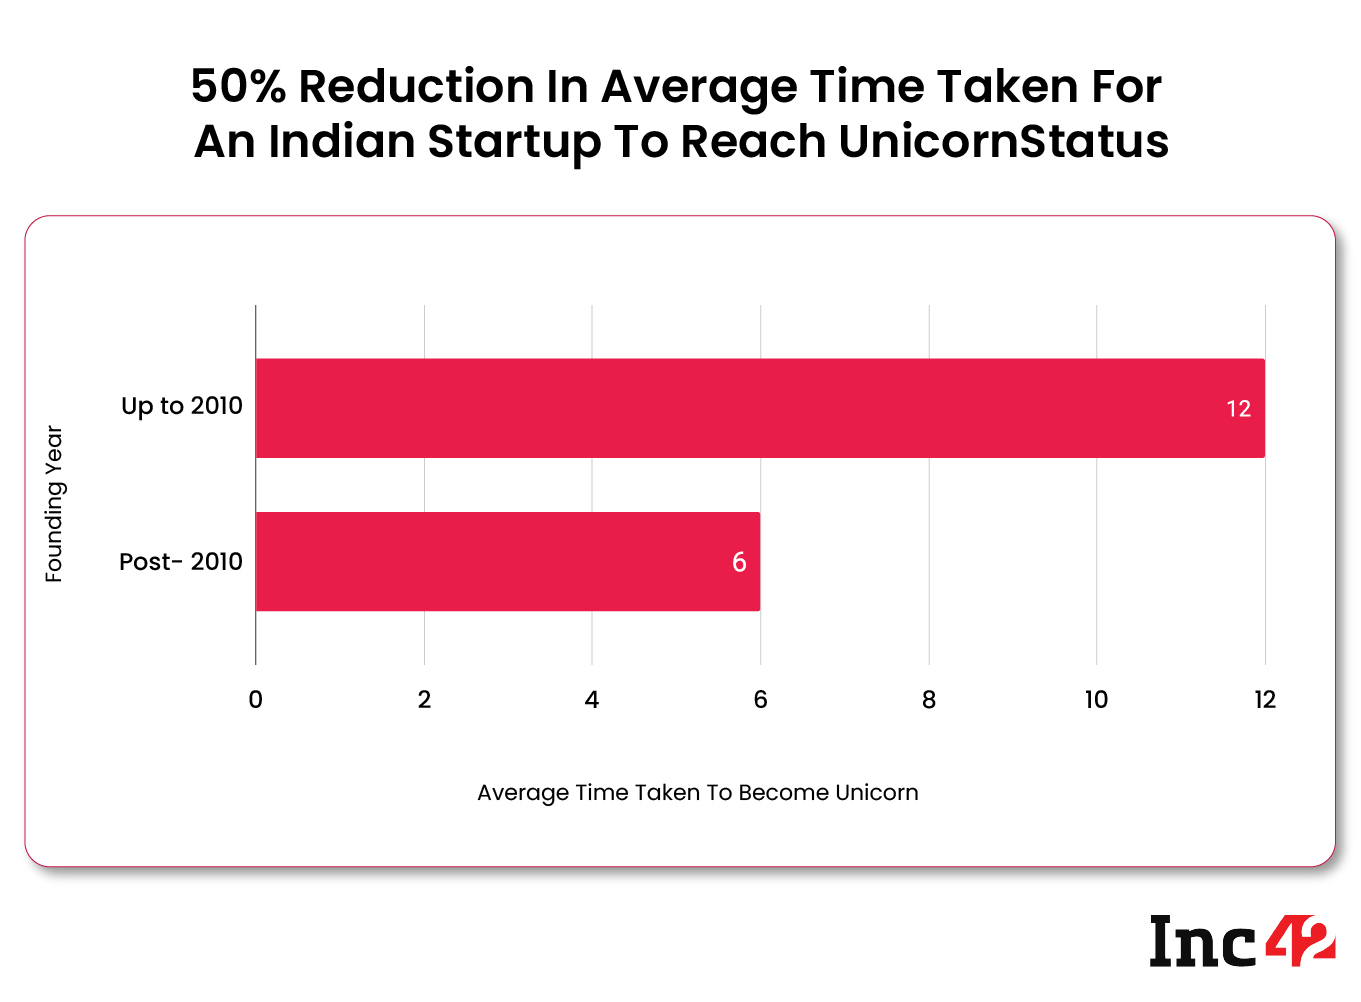 50% reduction in avg time taken for an Indian startup to reach unicorn status